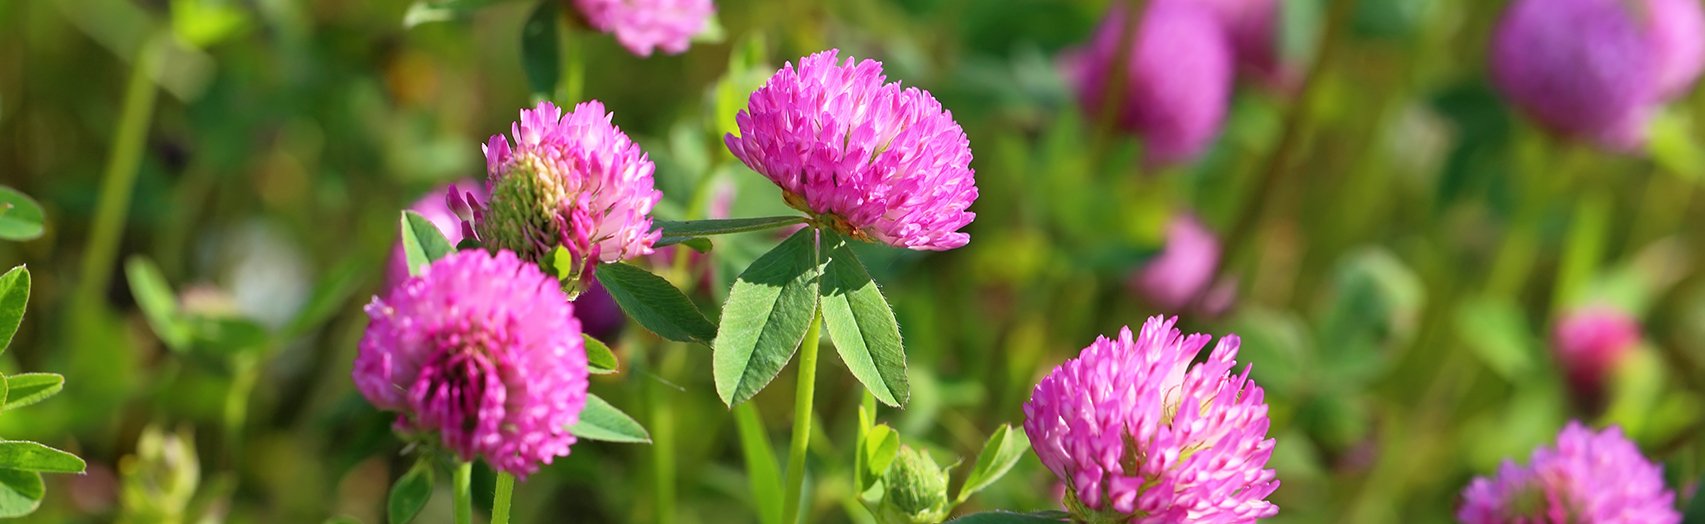 Thickets of a blossoming clover